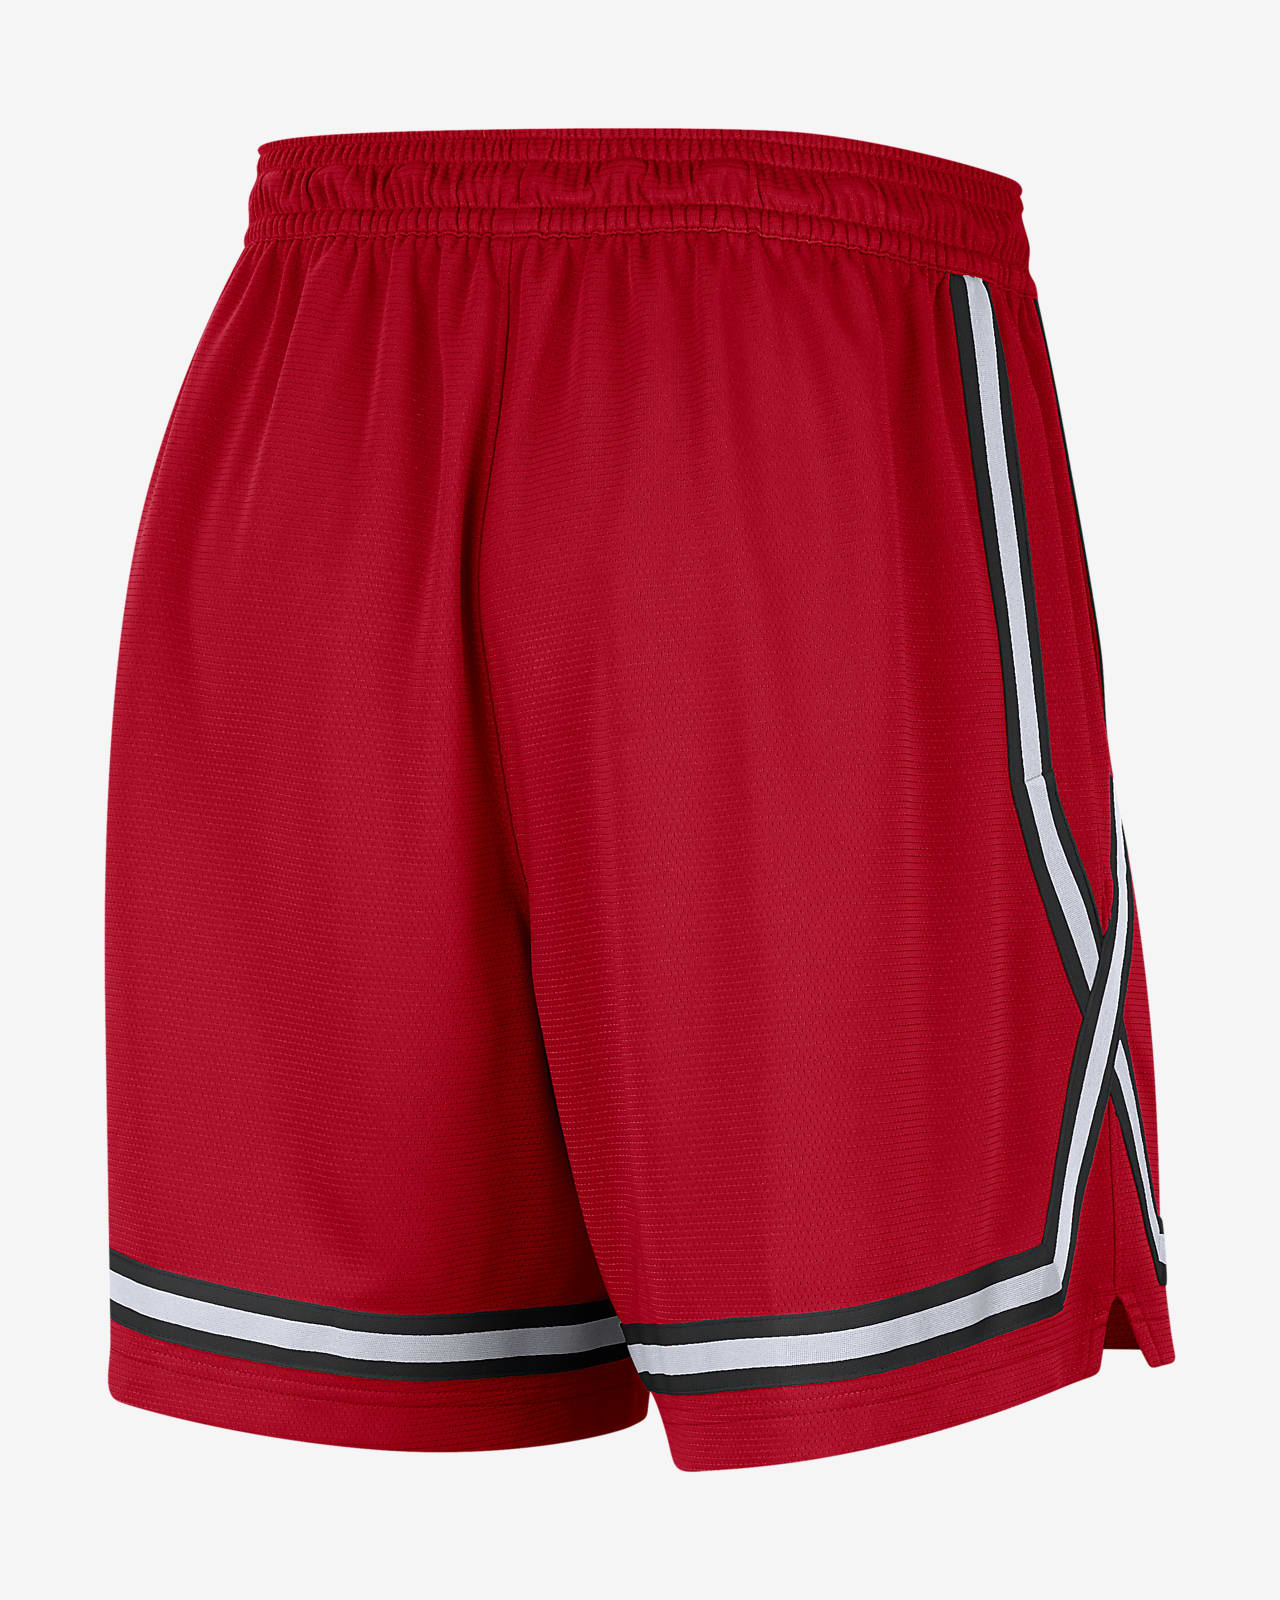 Nike Basketball Dri-FIT Crossover shorts in black